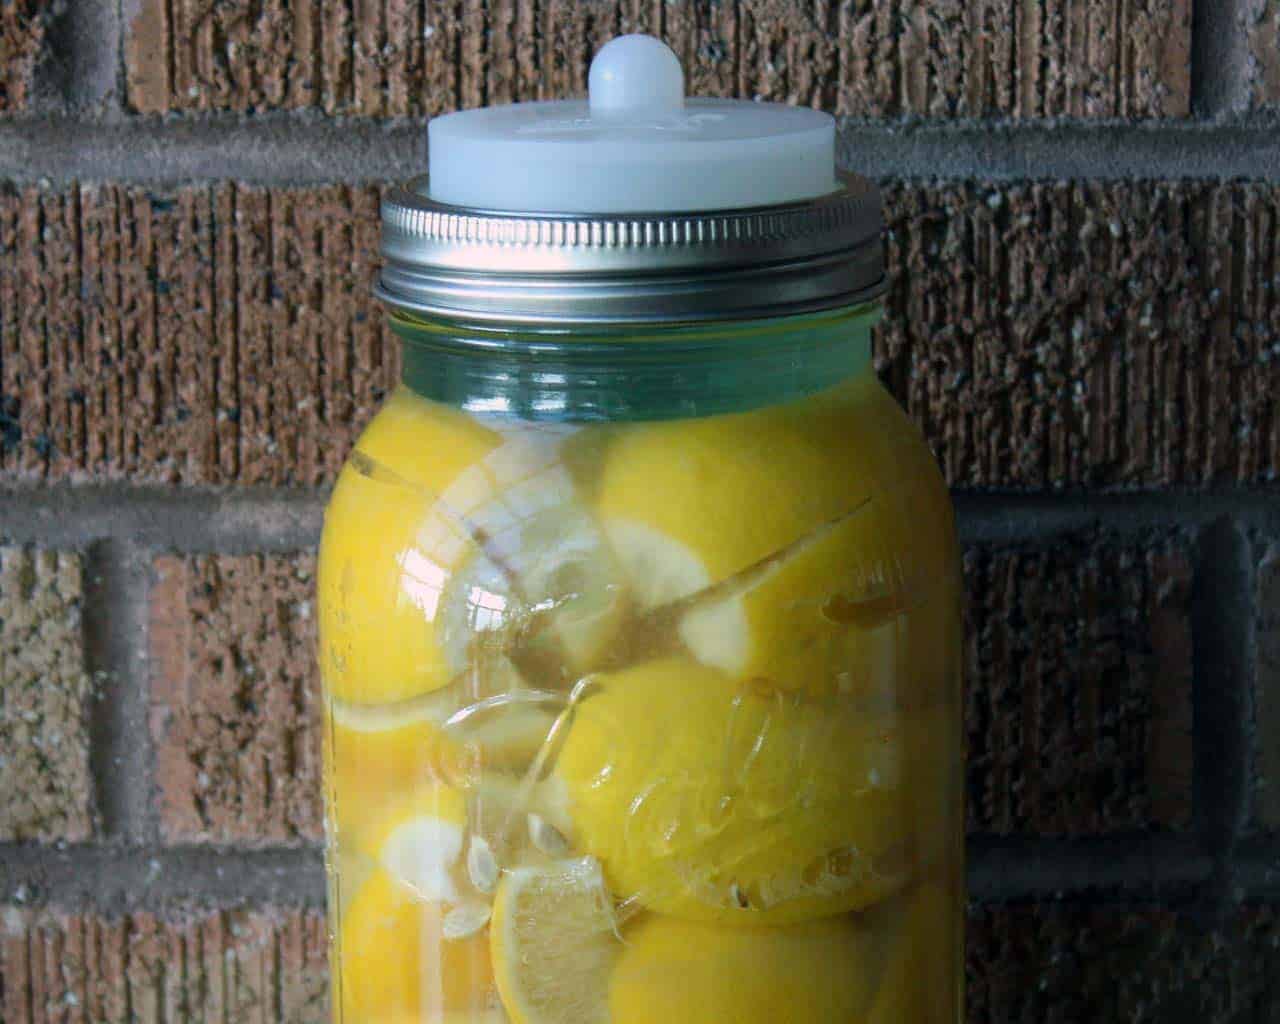 Clear silicone fermentation valve lid with Moroccan preserved lemons and tempered glass fermentation weight